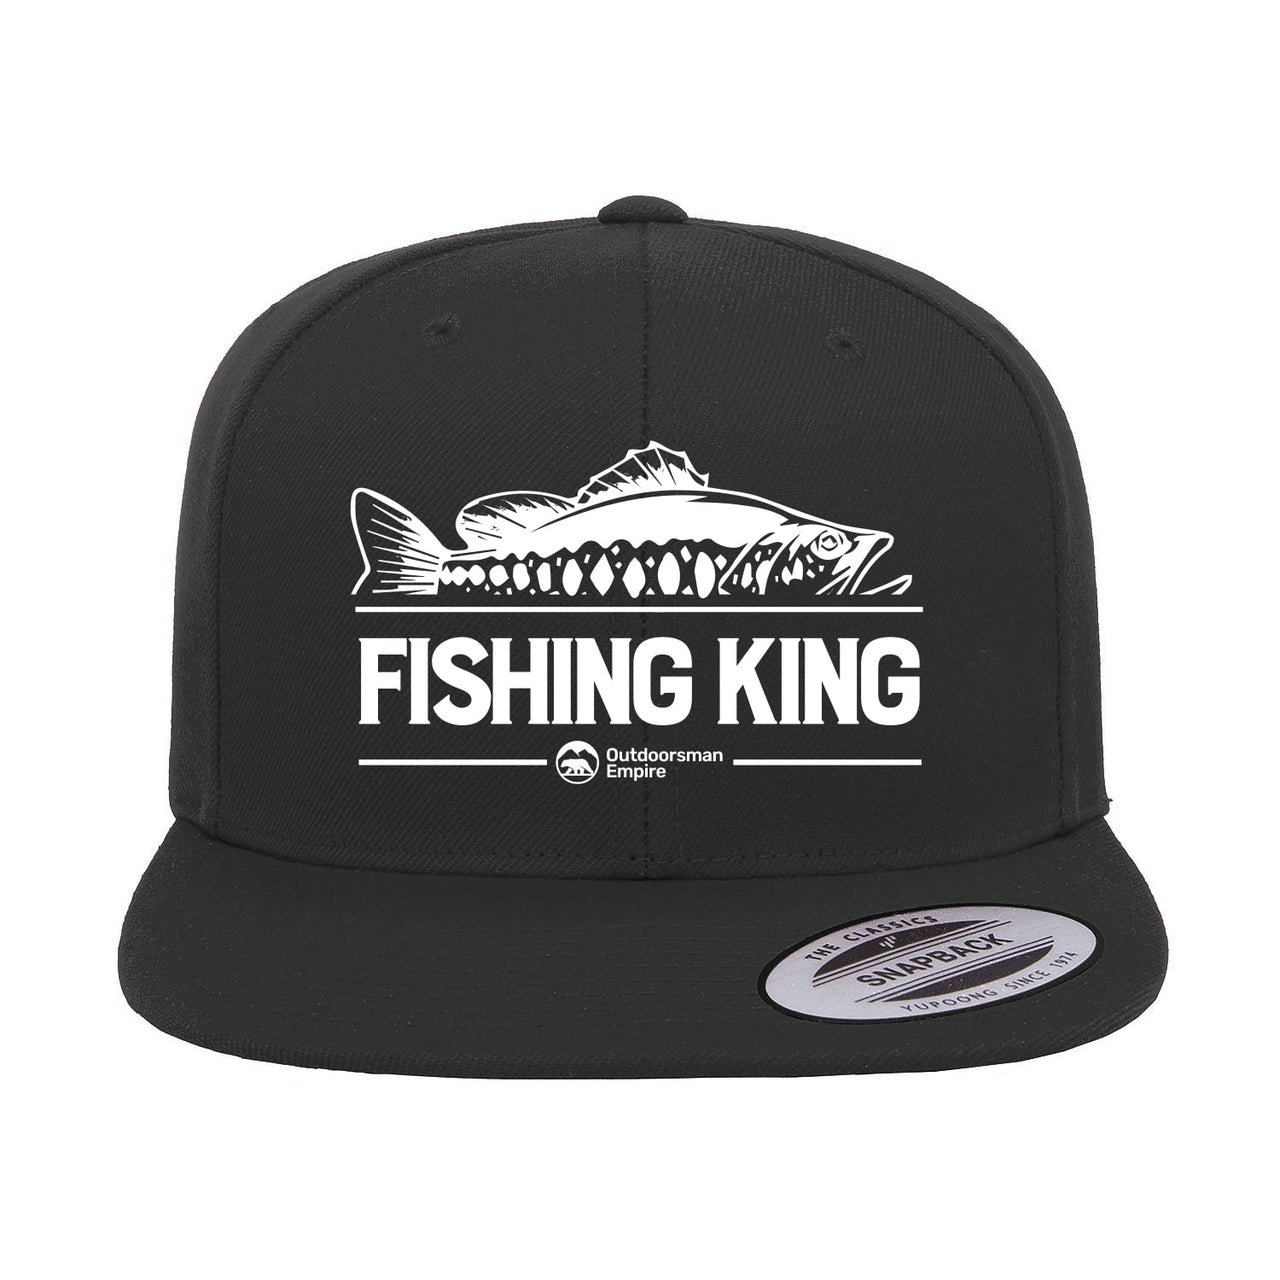 Fishing King Embroidered Flat Bill Cap